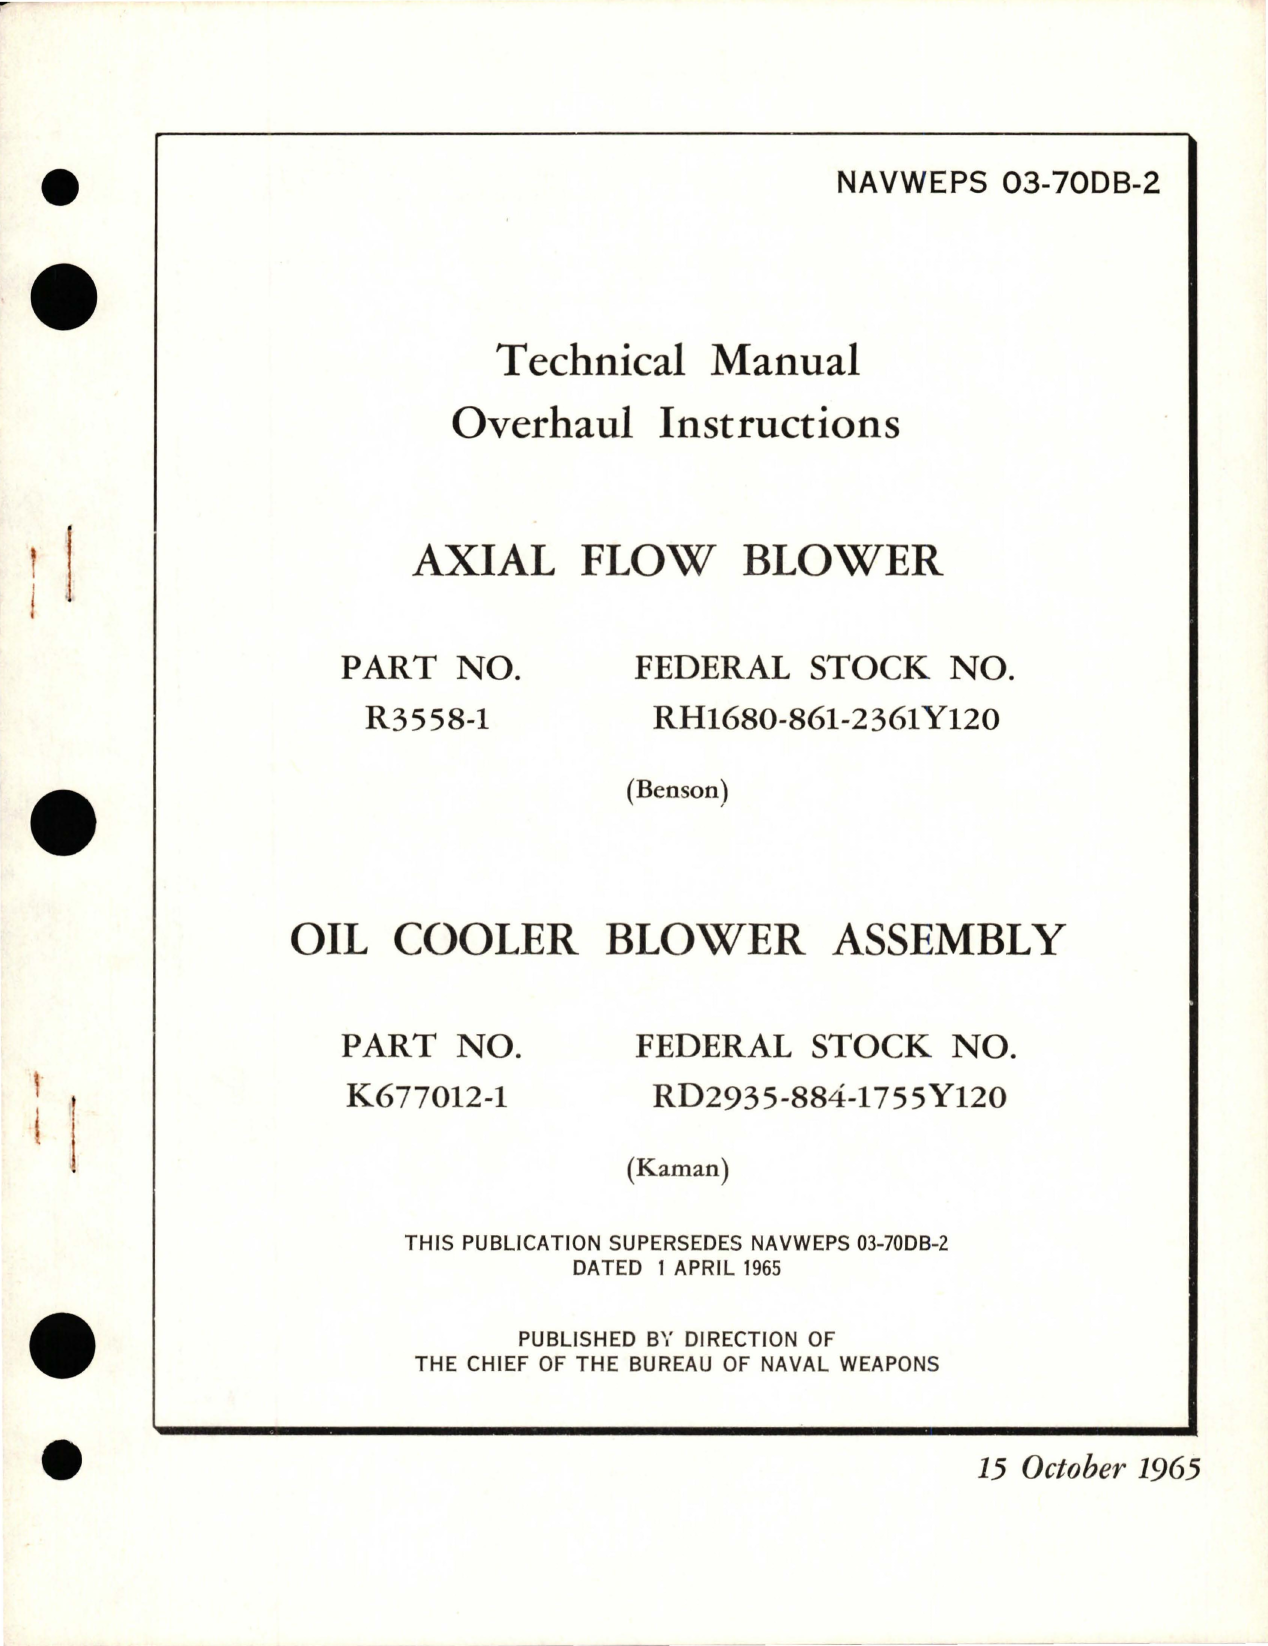 Sample page 1 from AirCorps Library document: Overhaul Instructions for Axial Flow Blower and Oil Cooler Blower Assembly - Parts R3558-1 and K677012-1 